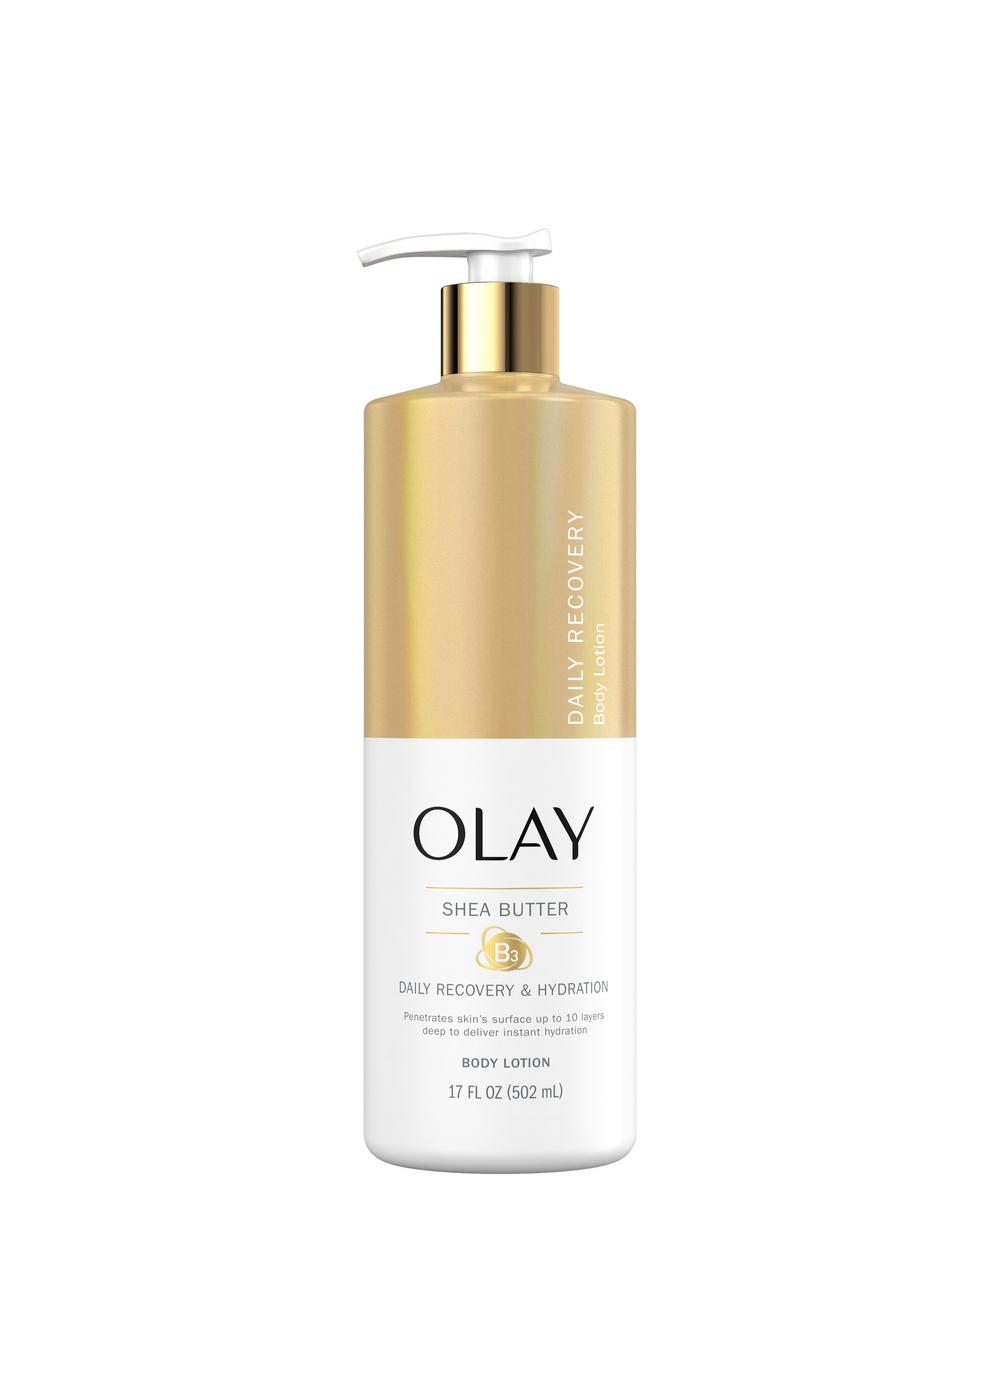 Olay Shea Butter Daily Recovery & Hydration Body Lotion; image 1 of 2